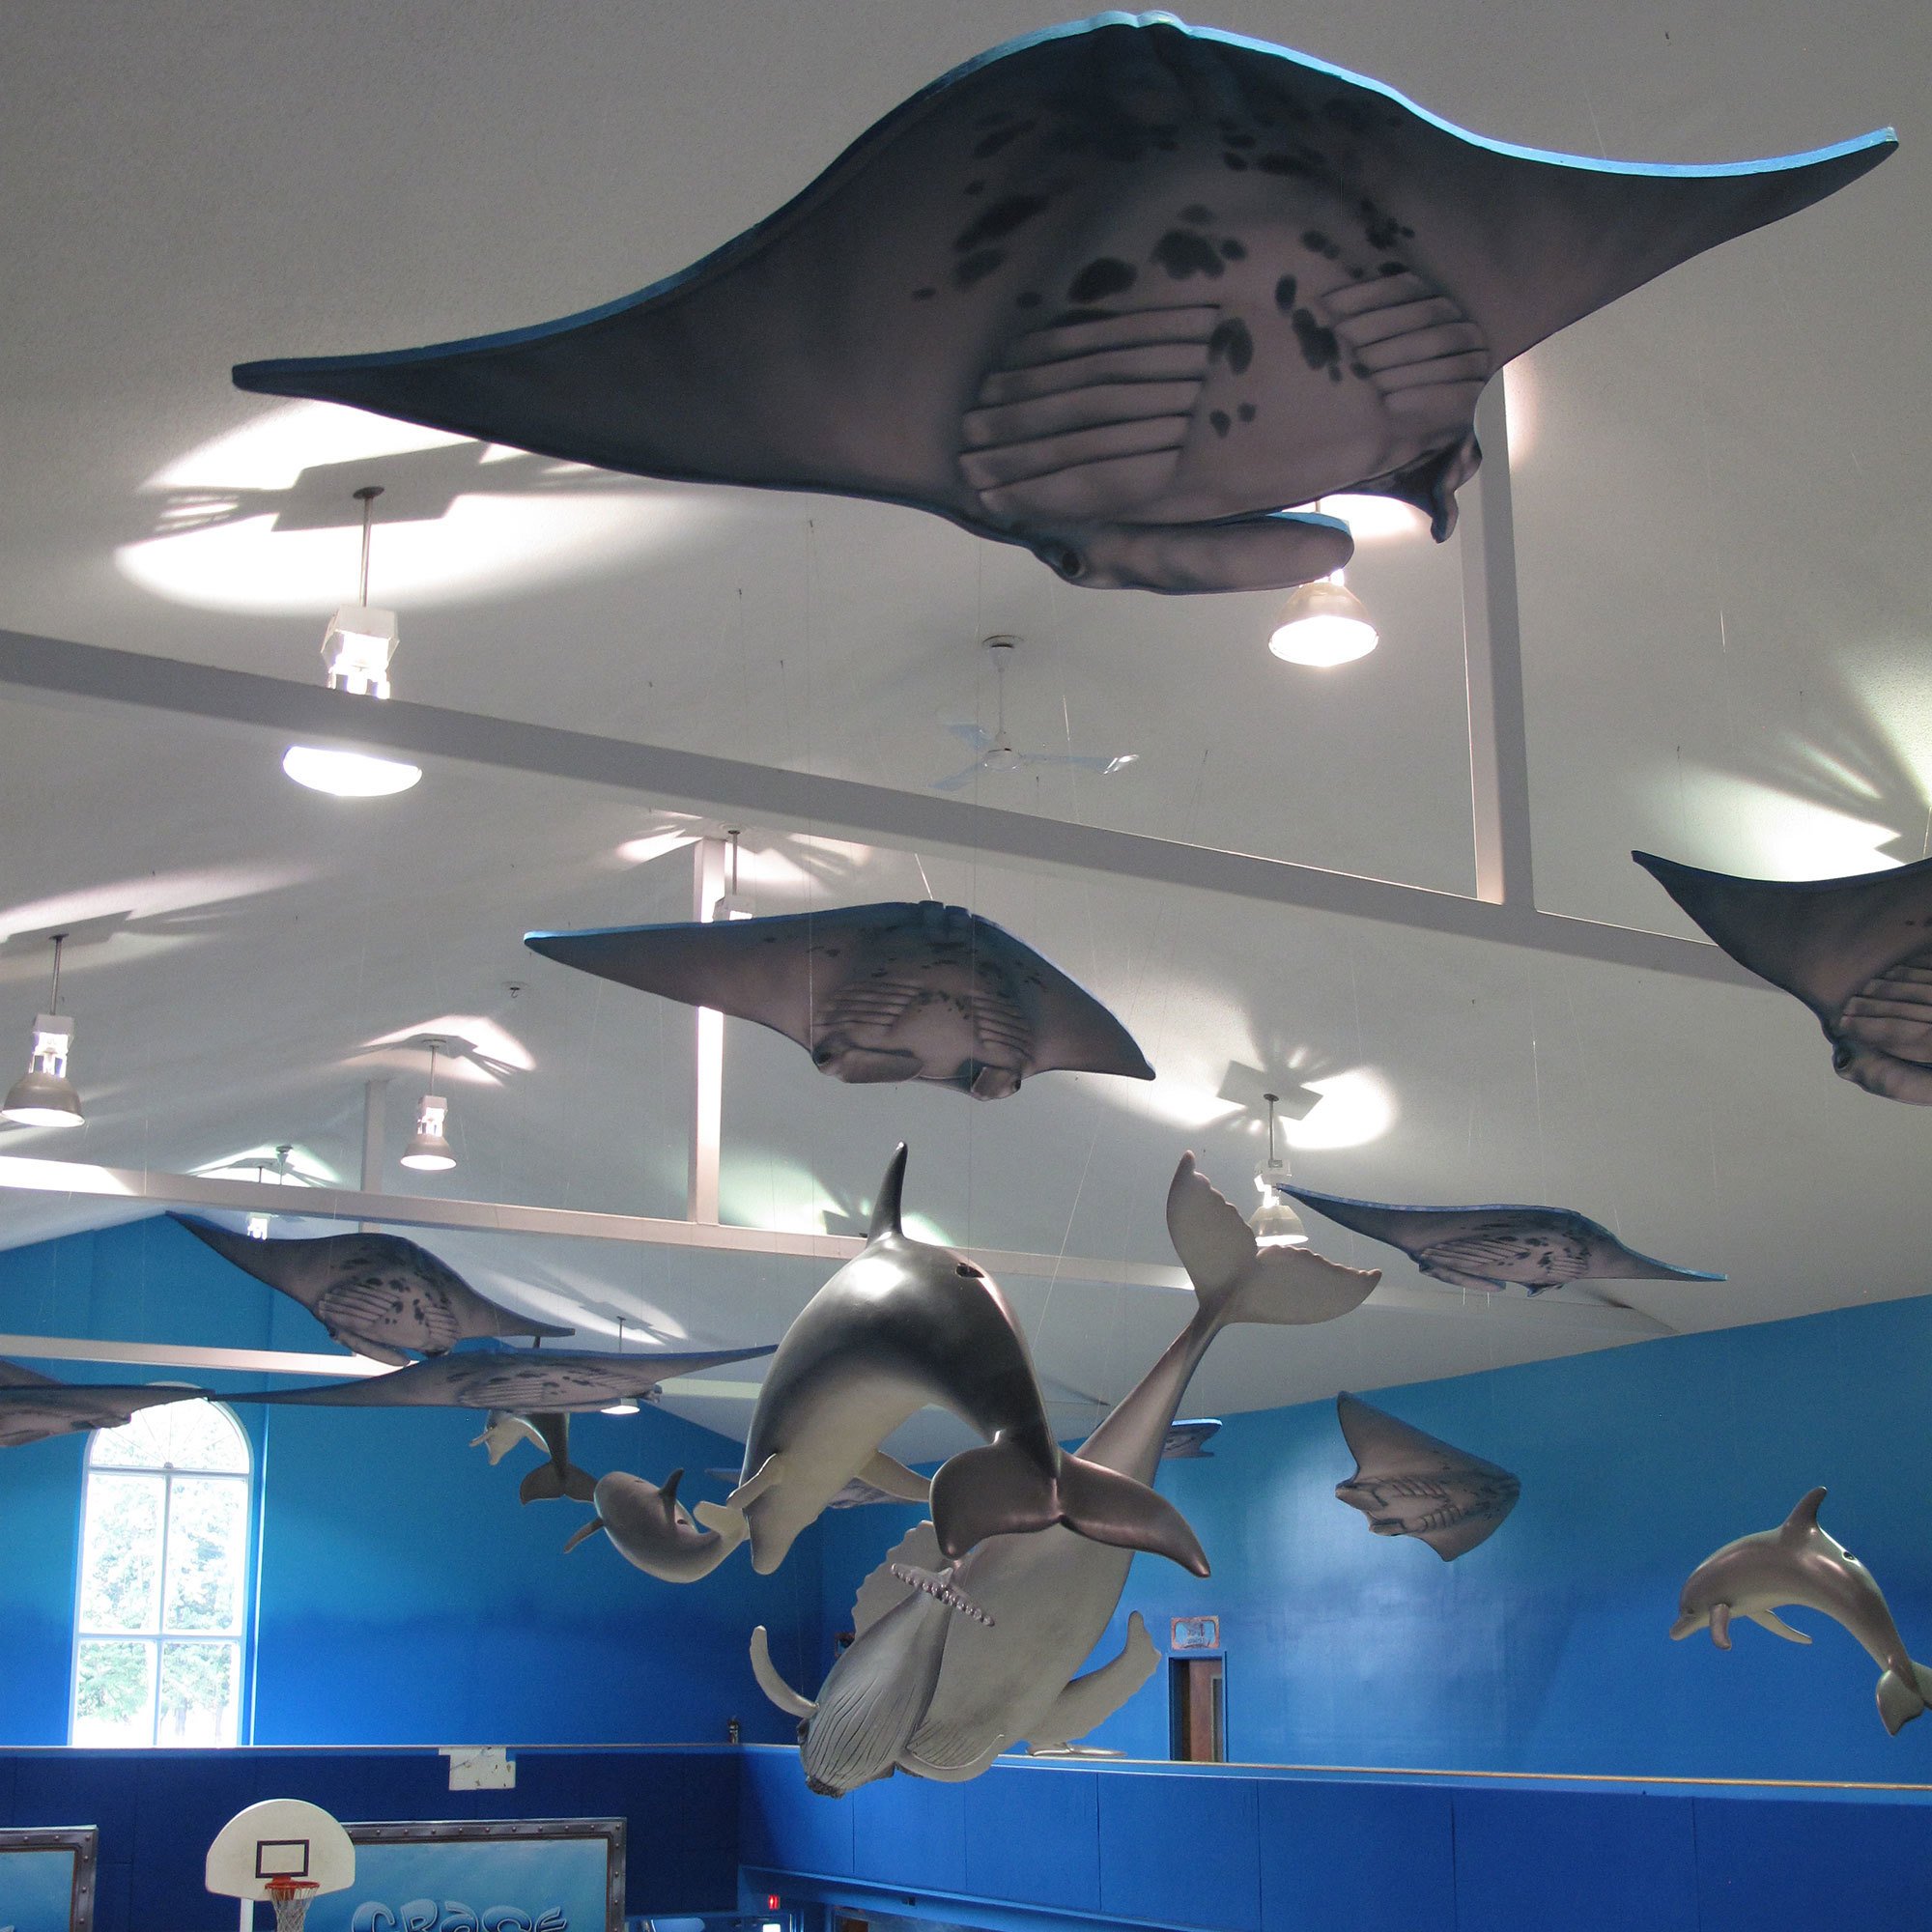 Stingray Themed Sound Panels hanging from a ceiling